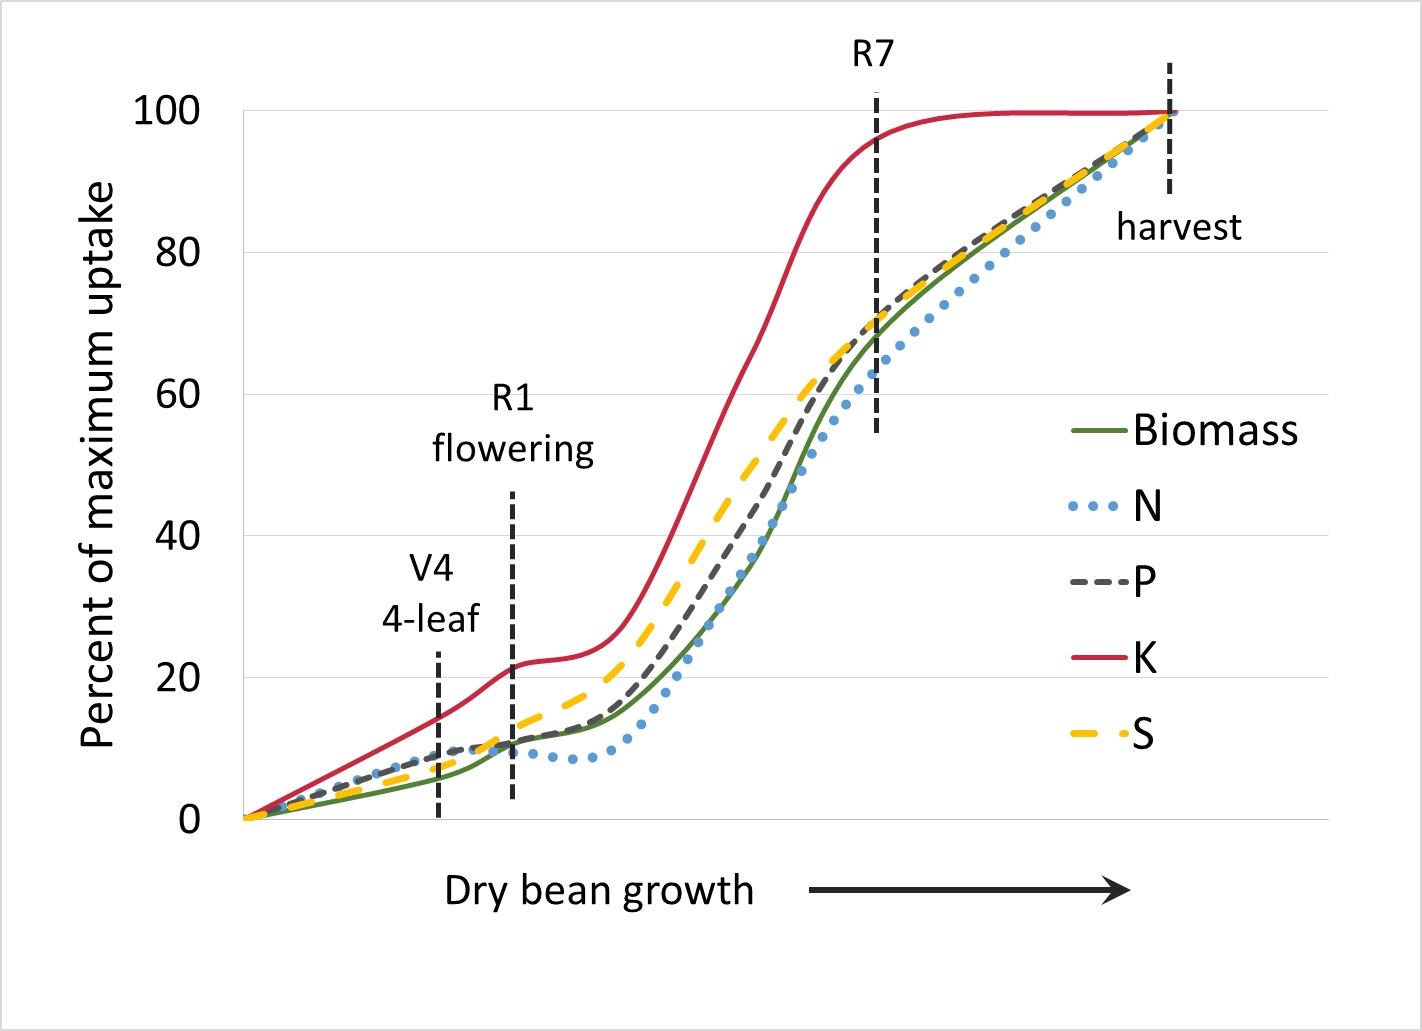 Dry bean: Uptake of all nutrients rapidly increases during reproductive growth. K uptake is complete around R7, and other nutrients increase up until harvest.